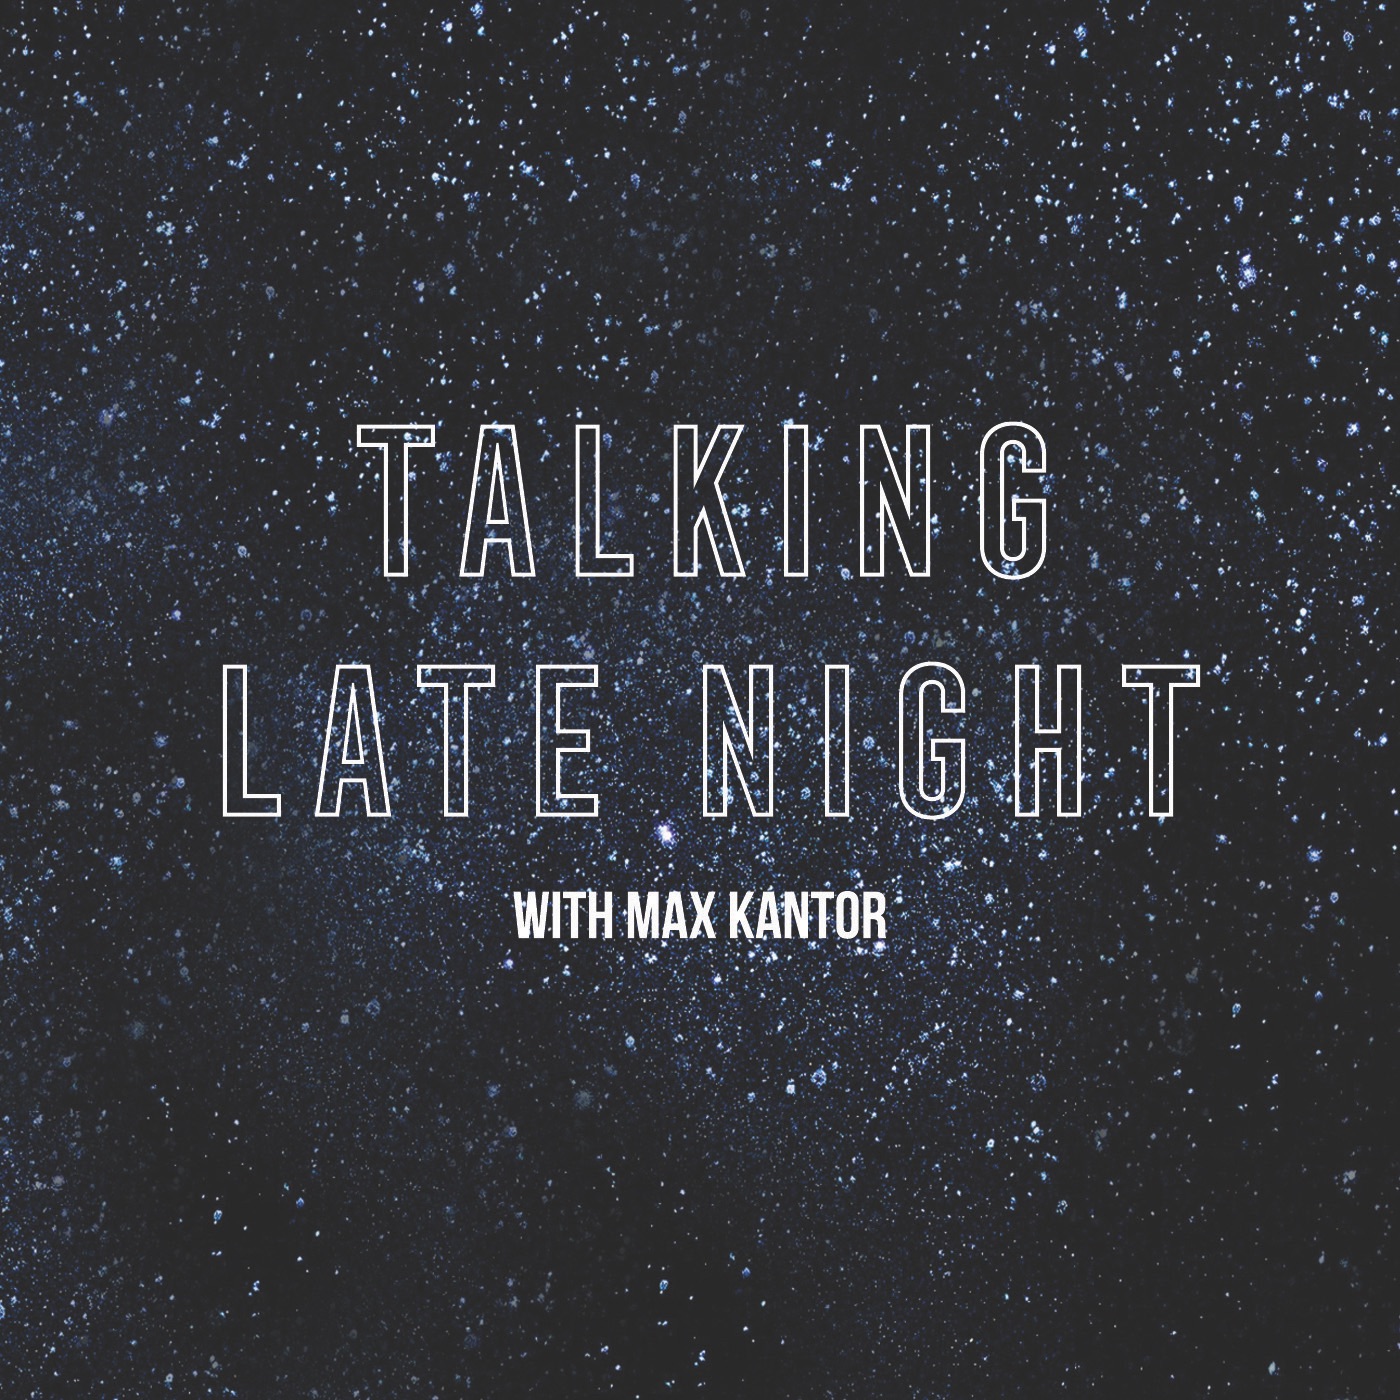 Talking to the night. Late Night talking. Late Talker книги. All Night the influence.